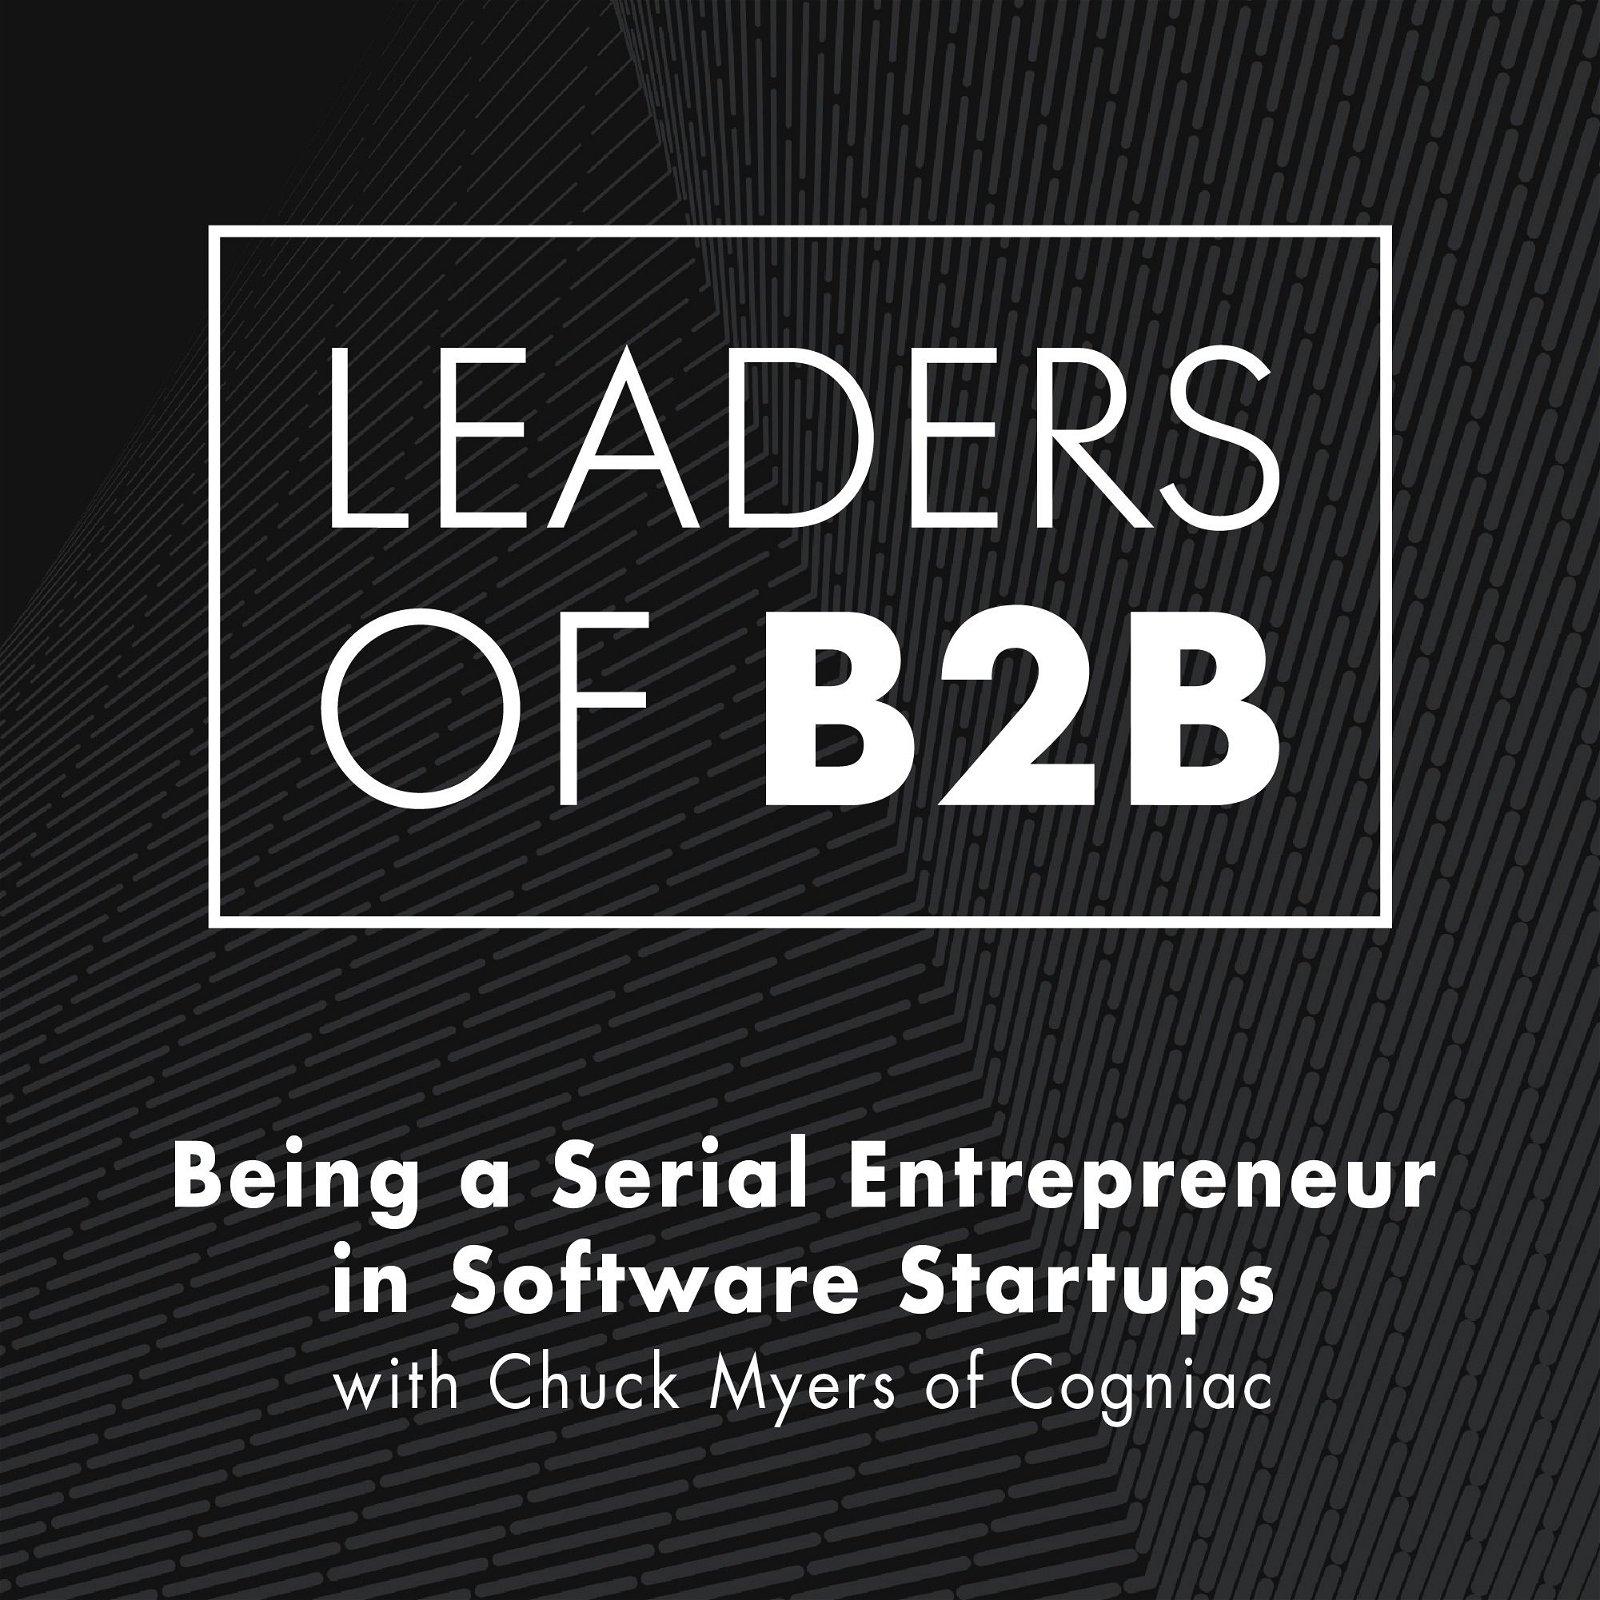 Being a Serial Entrepreneur in Software Startups with Chuck Myers of Cogniac